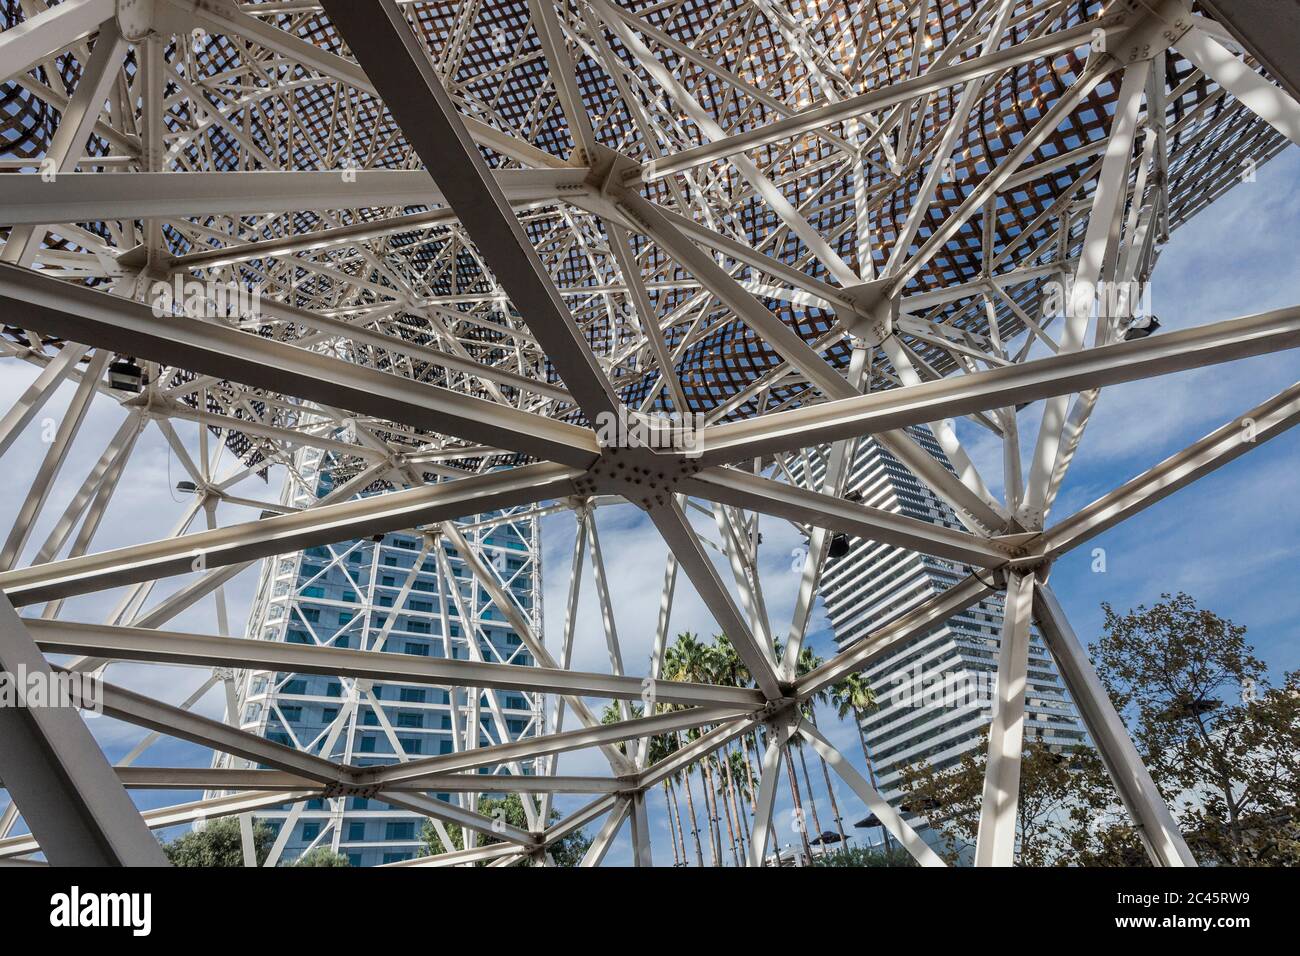 Steel structure at the casino with Hotel Arts in the background, Barcelona, Spain Stock Photo